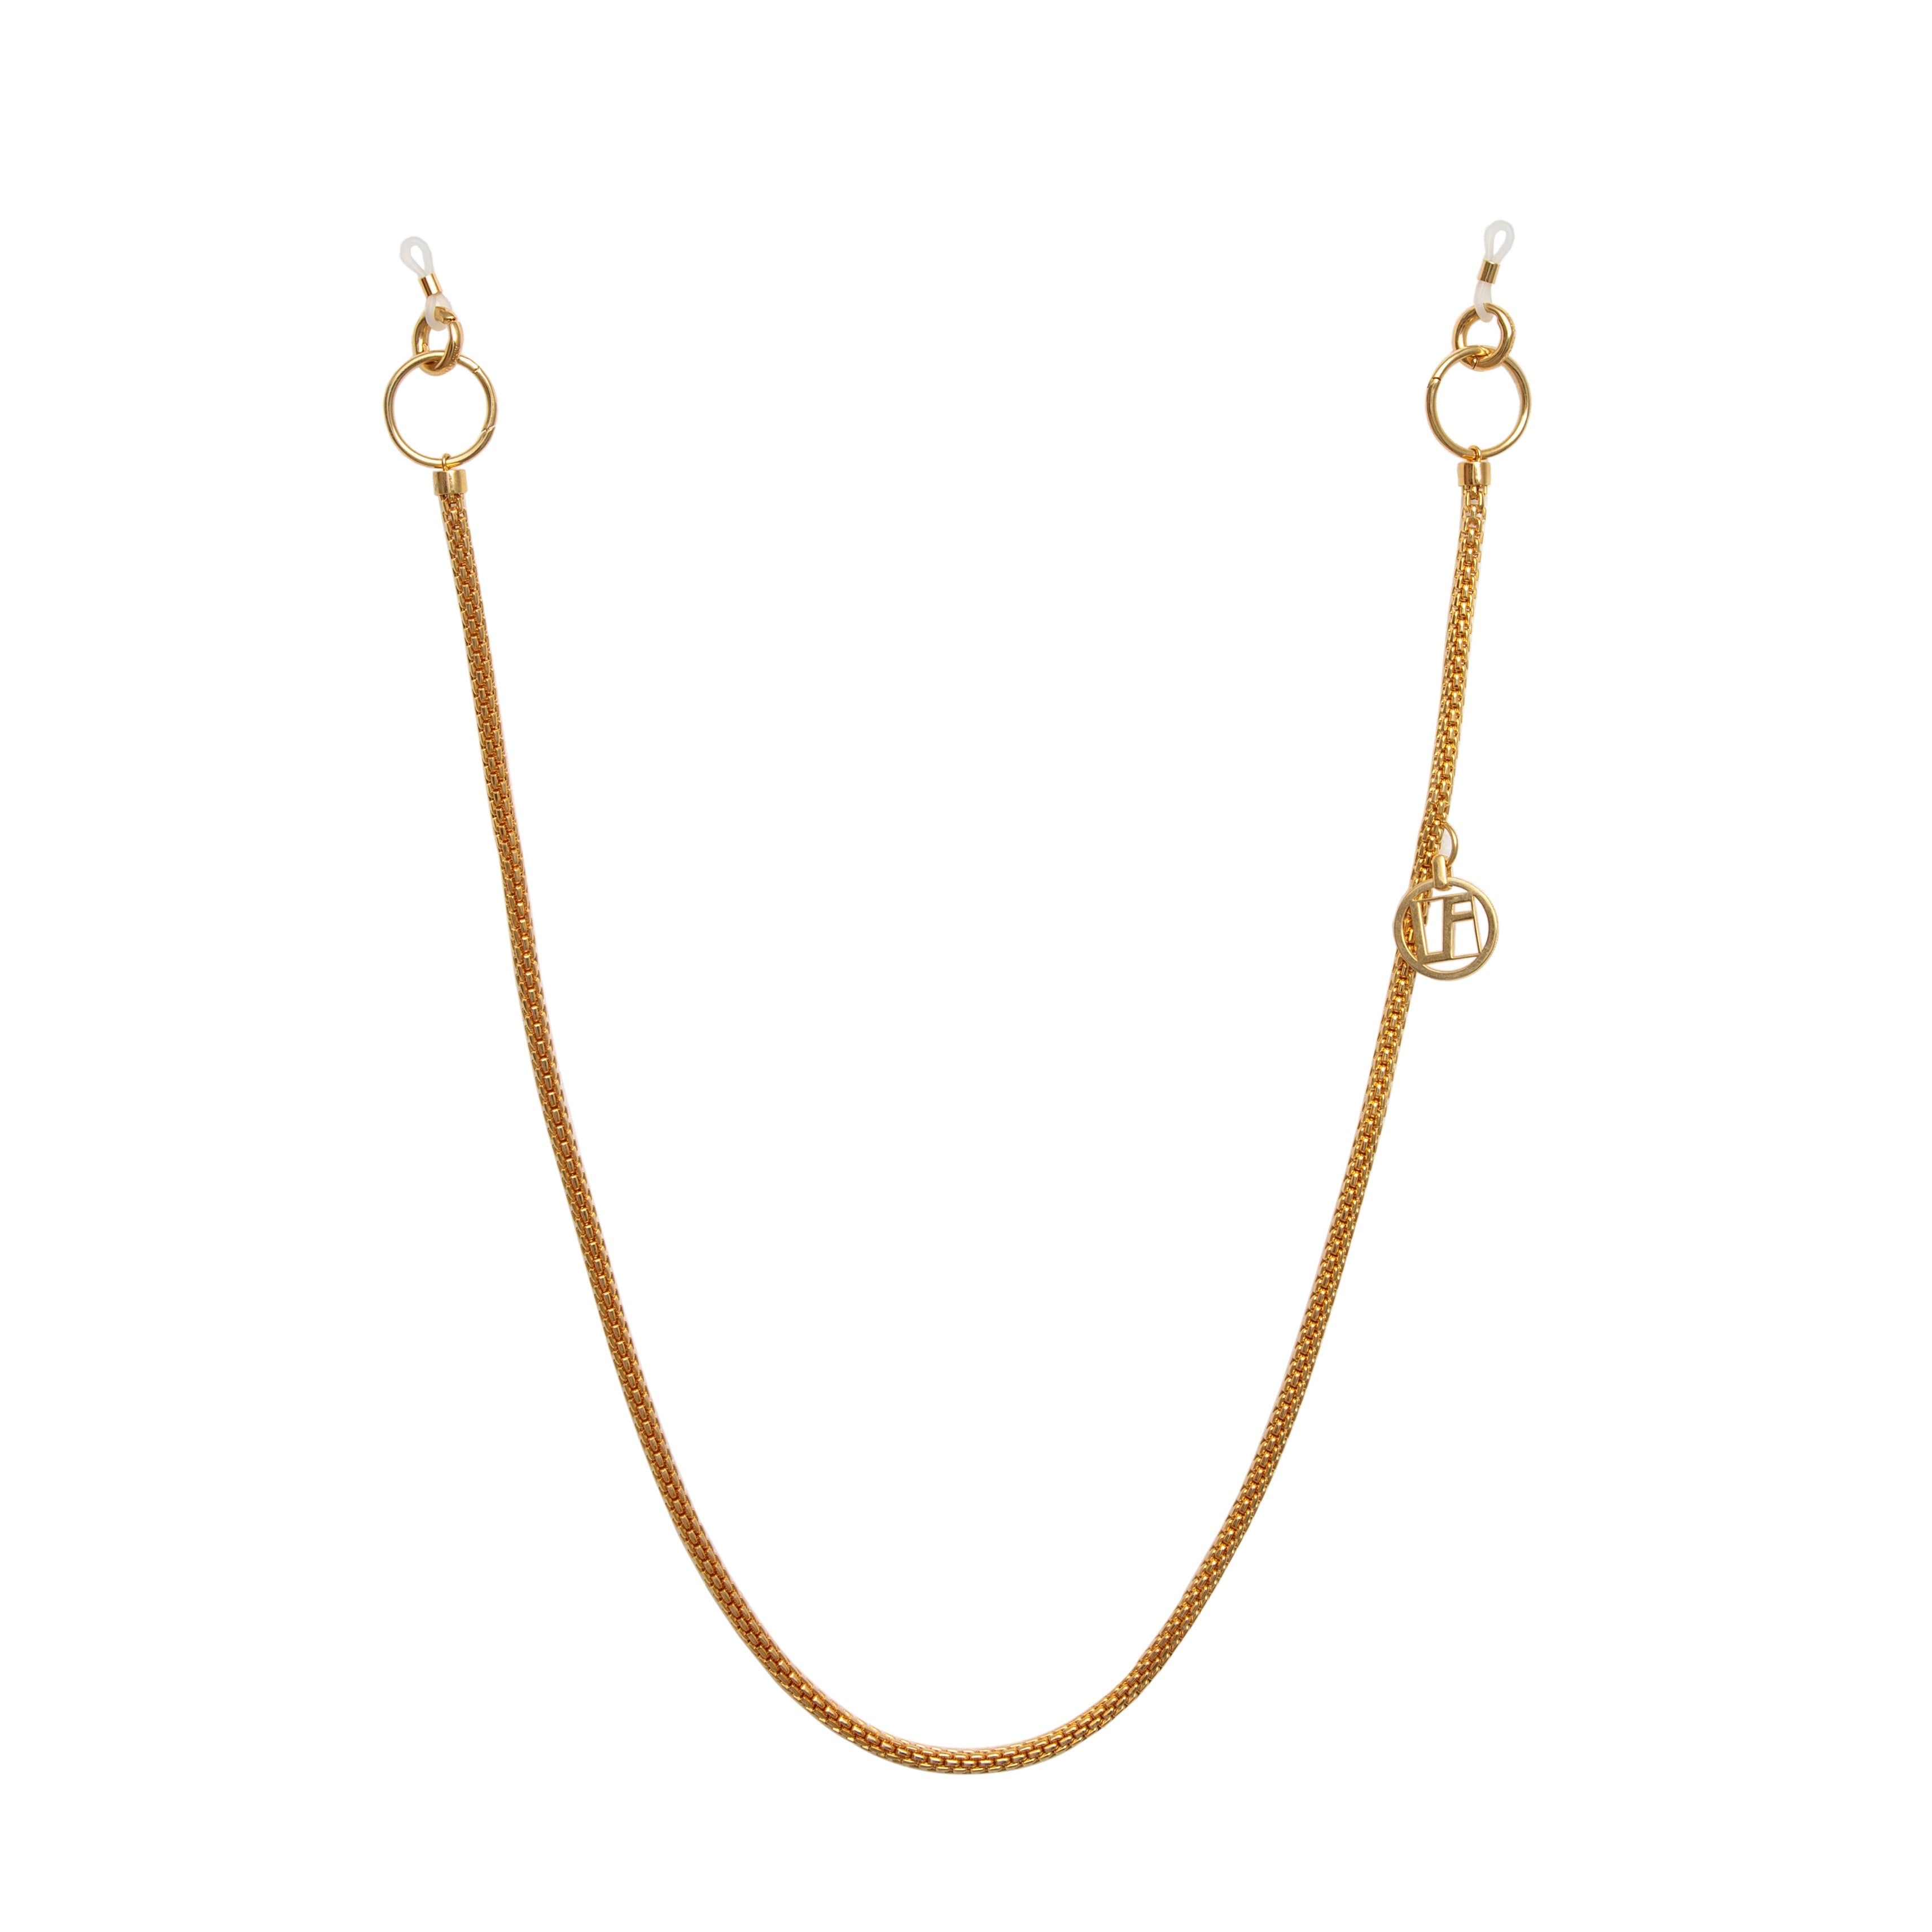 SMALL GOLD METAL CHAIN - 1